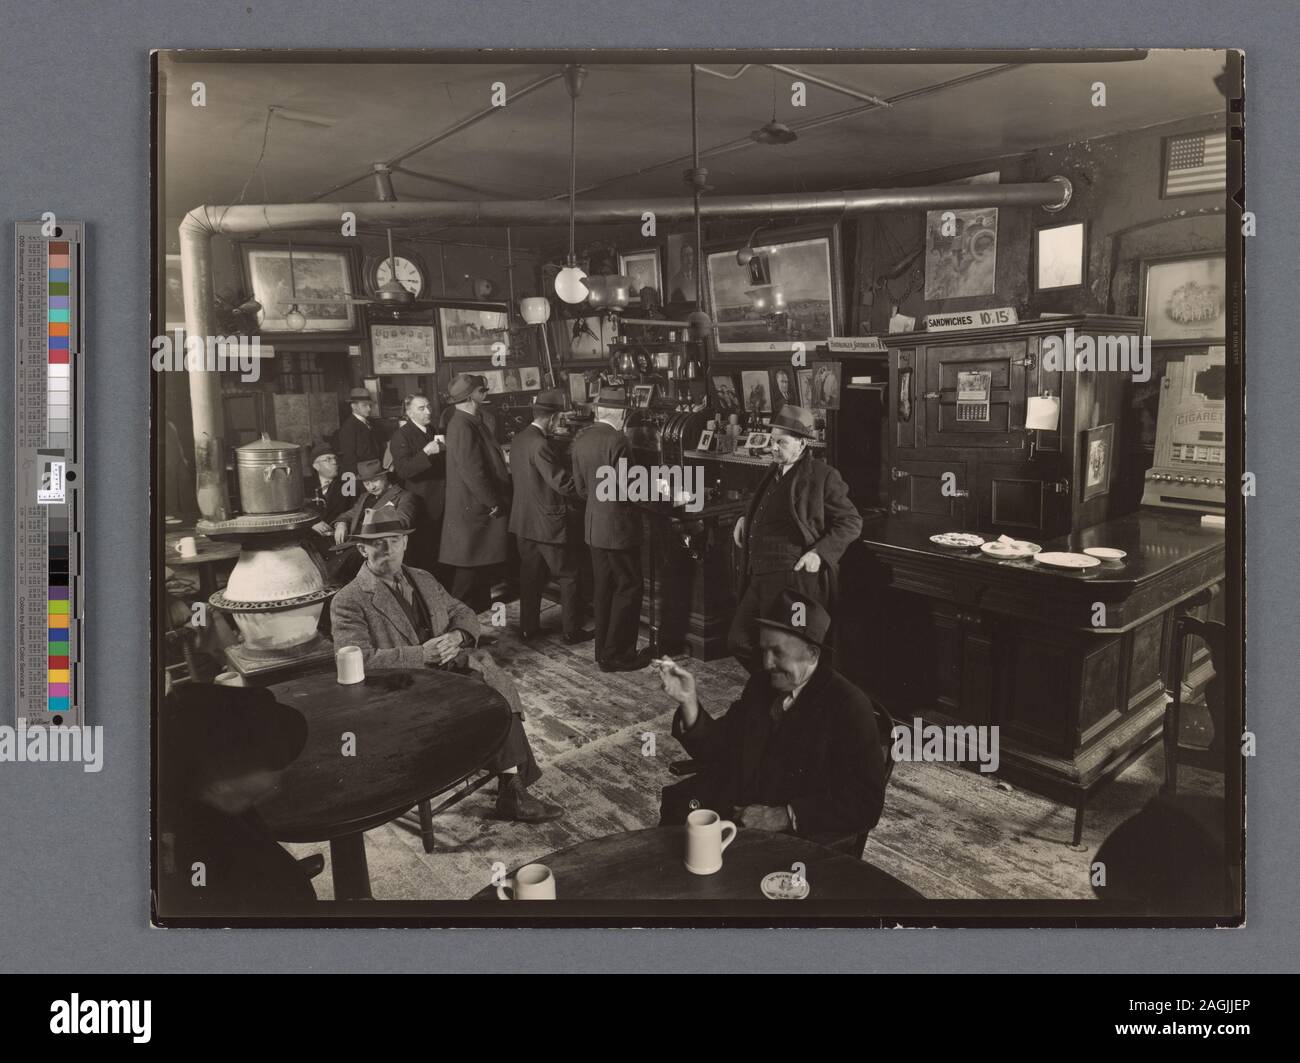 Men stand at bar, sit near stove in barroom, sawdust on the floor, pictures on the wall, food on bar near cigarette machine. Citation/Reference: CNY# 258; McSorley's Ale House, 15 East 7th Street, Manhattan. Stock Photo